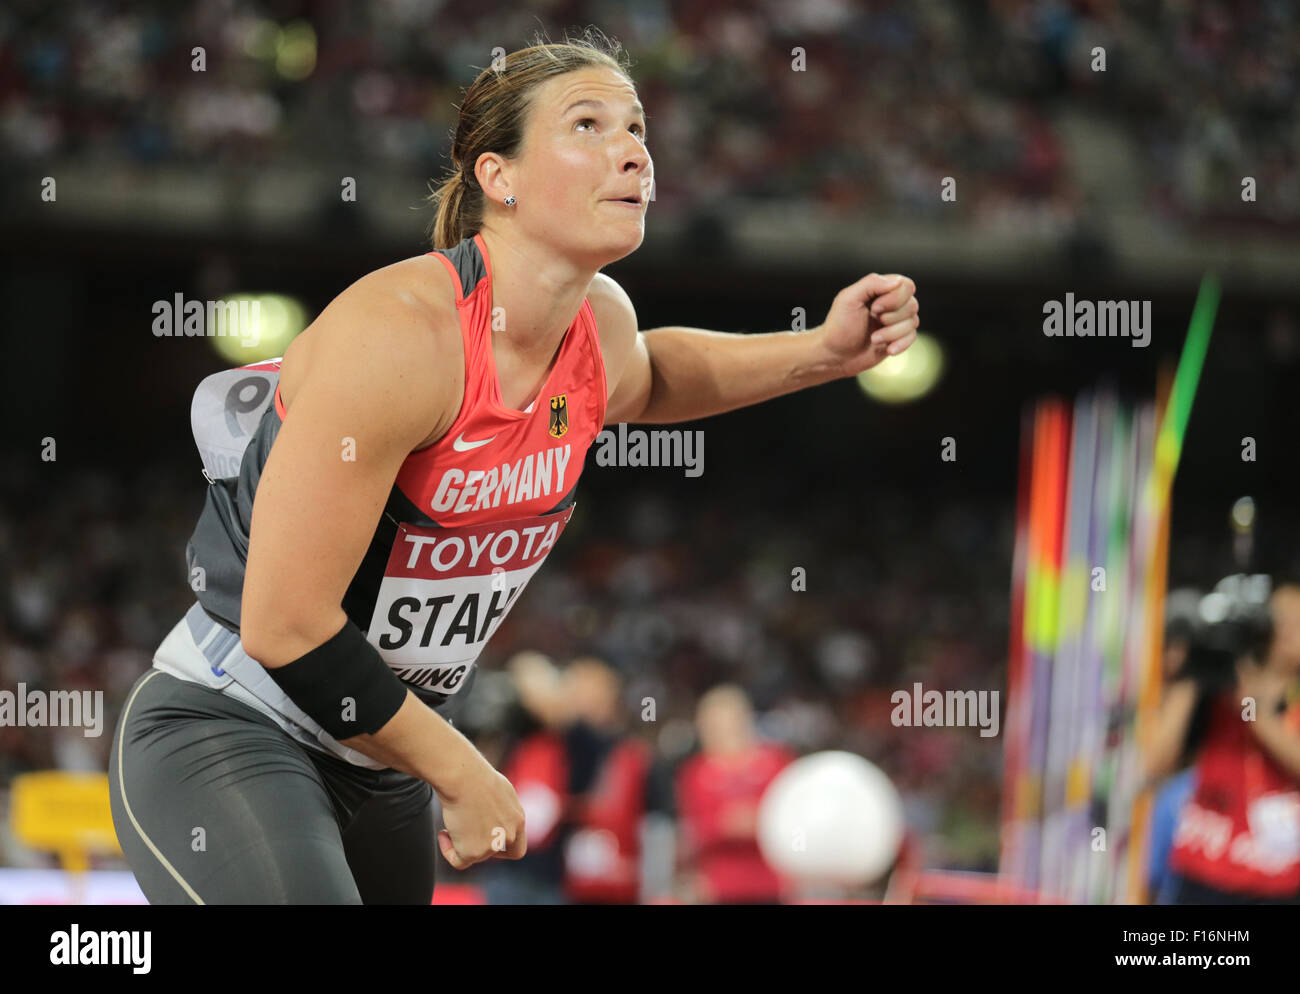 Beijing, China. 28th Aug, 2015. Linda Stahl of Germany in action during the Women's Javelin Throw Qualification at the Beijing 2015 IAAF World Championships at the National Stadium, also known as Bird's Nest, in Beijing, China, 28 August 2015. Credit:  dpa picture alliance/Alamy Live News Stock Photo